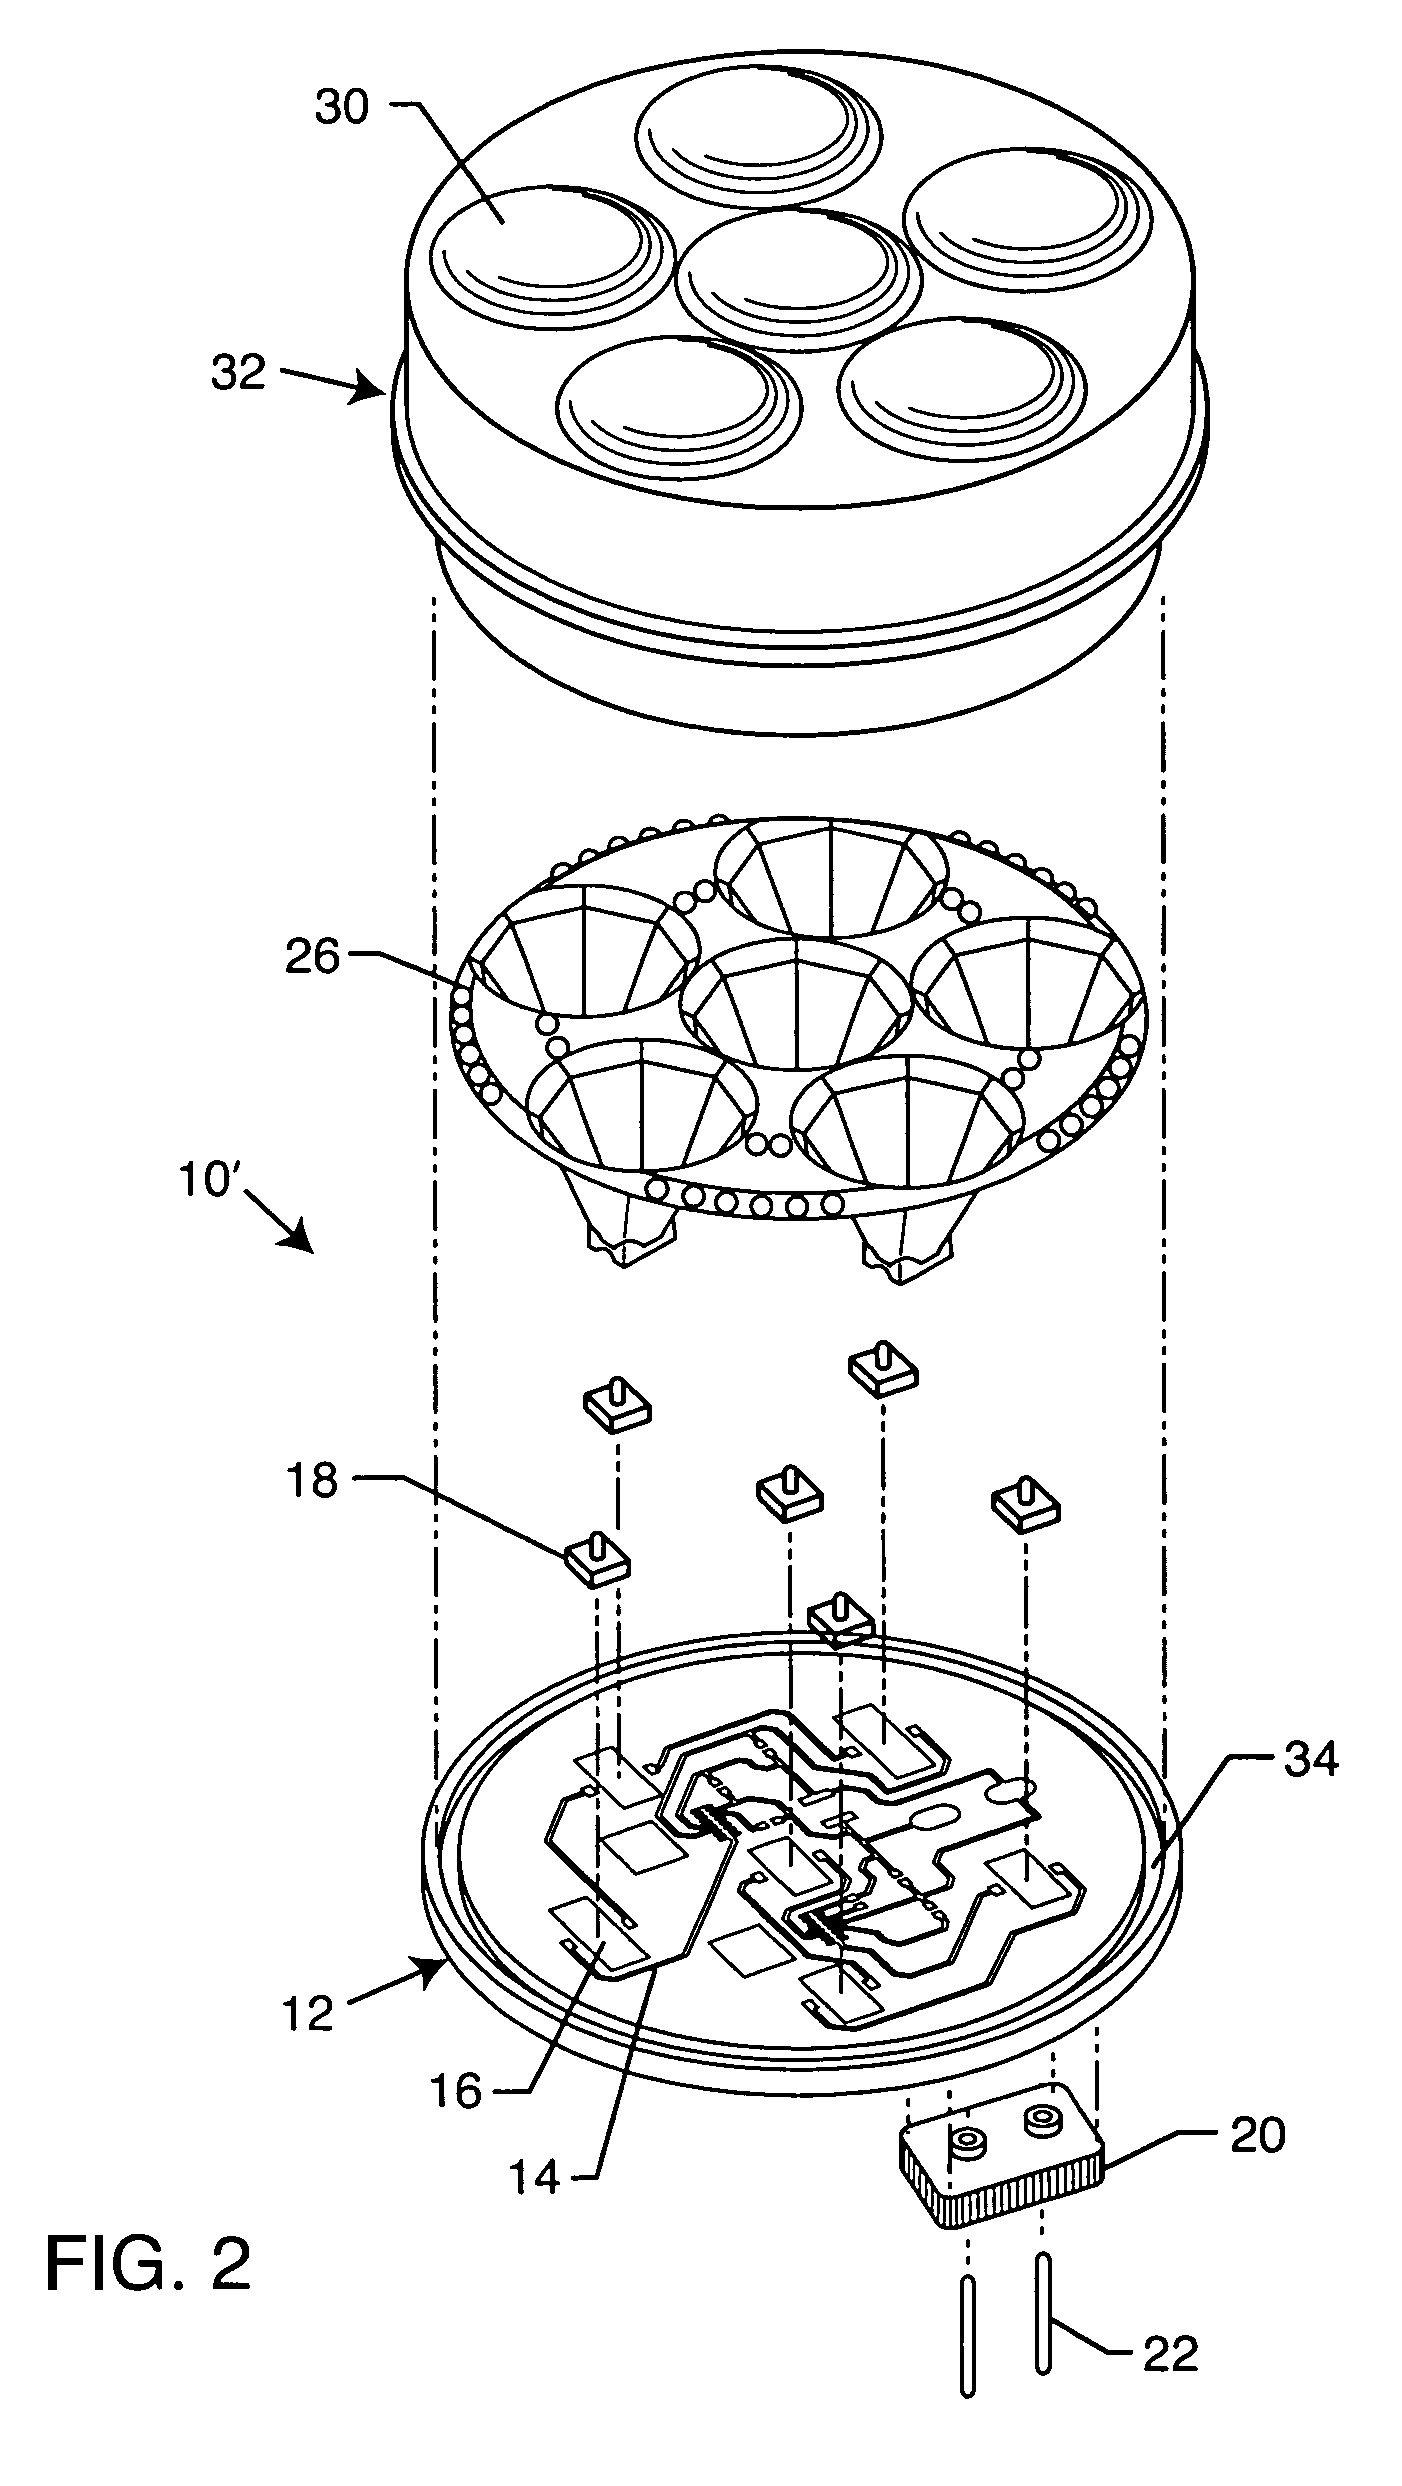 Process for manufacturing an LED lamp with integrated heat sink